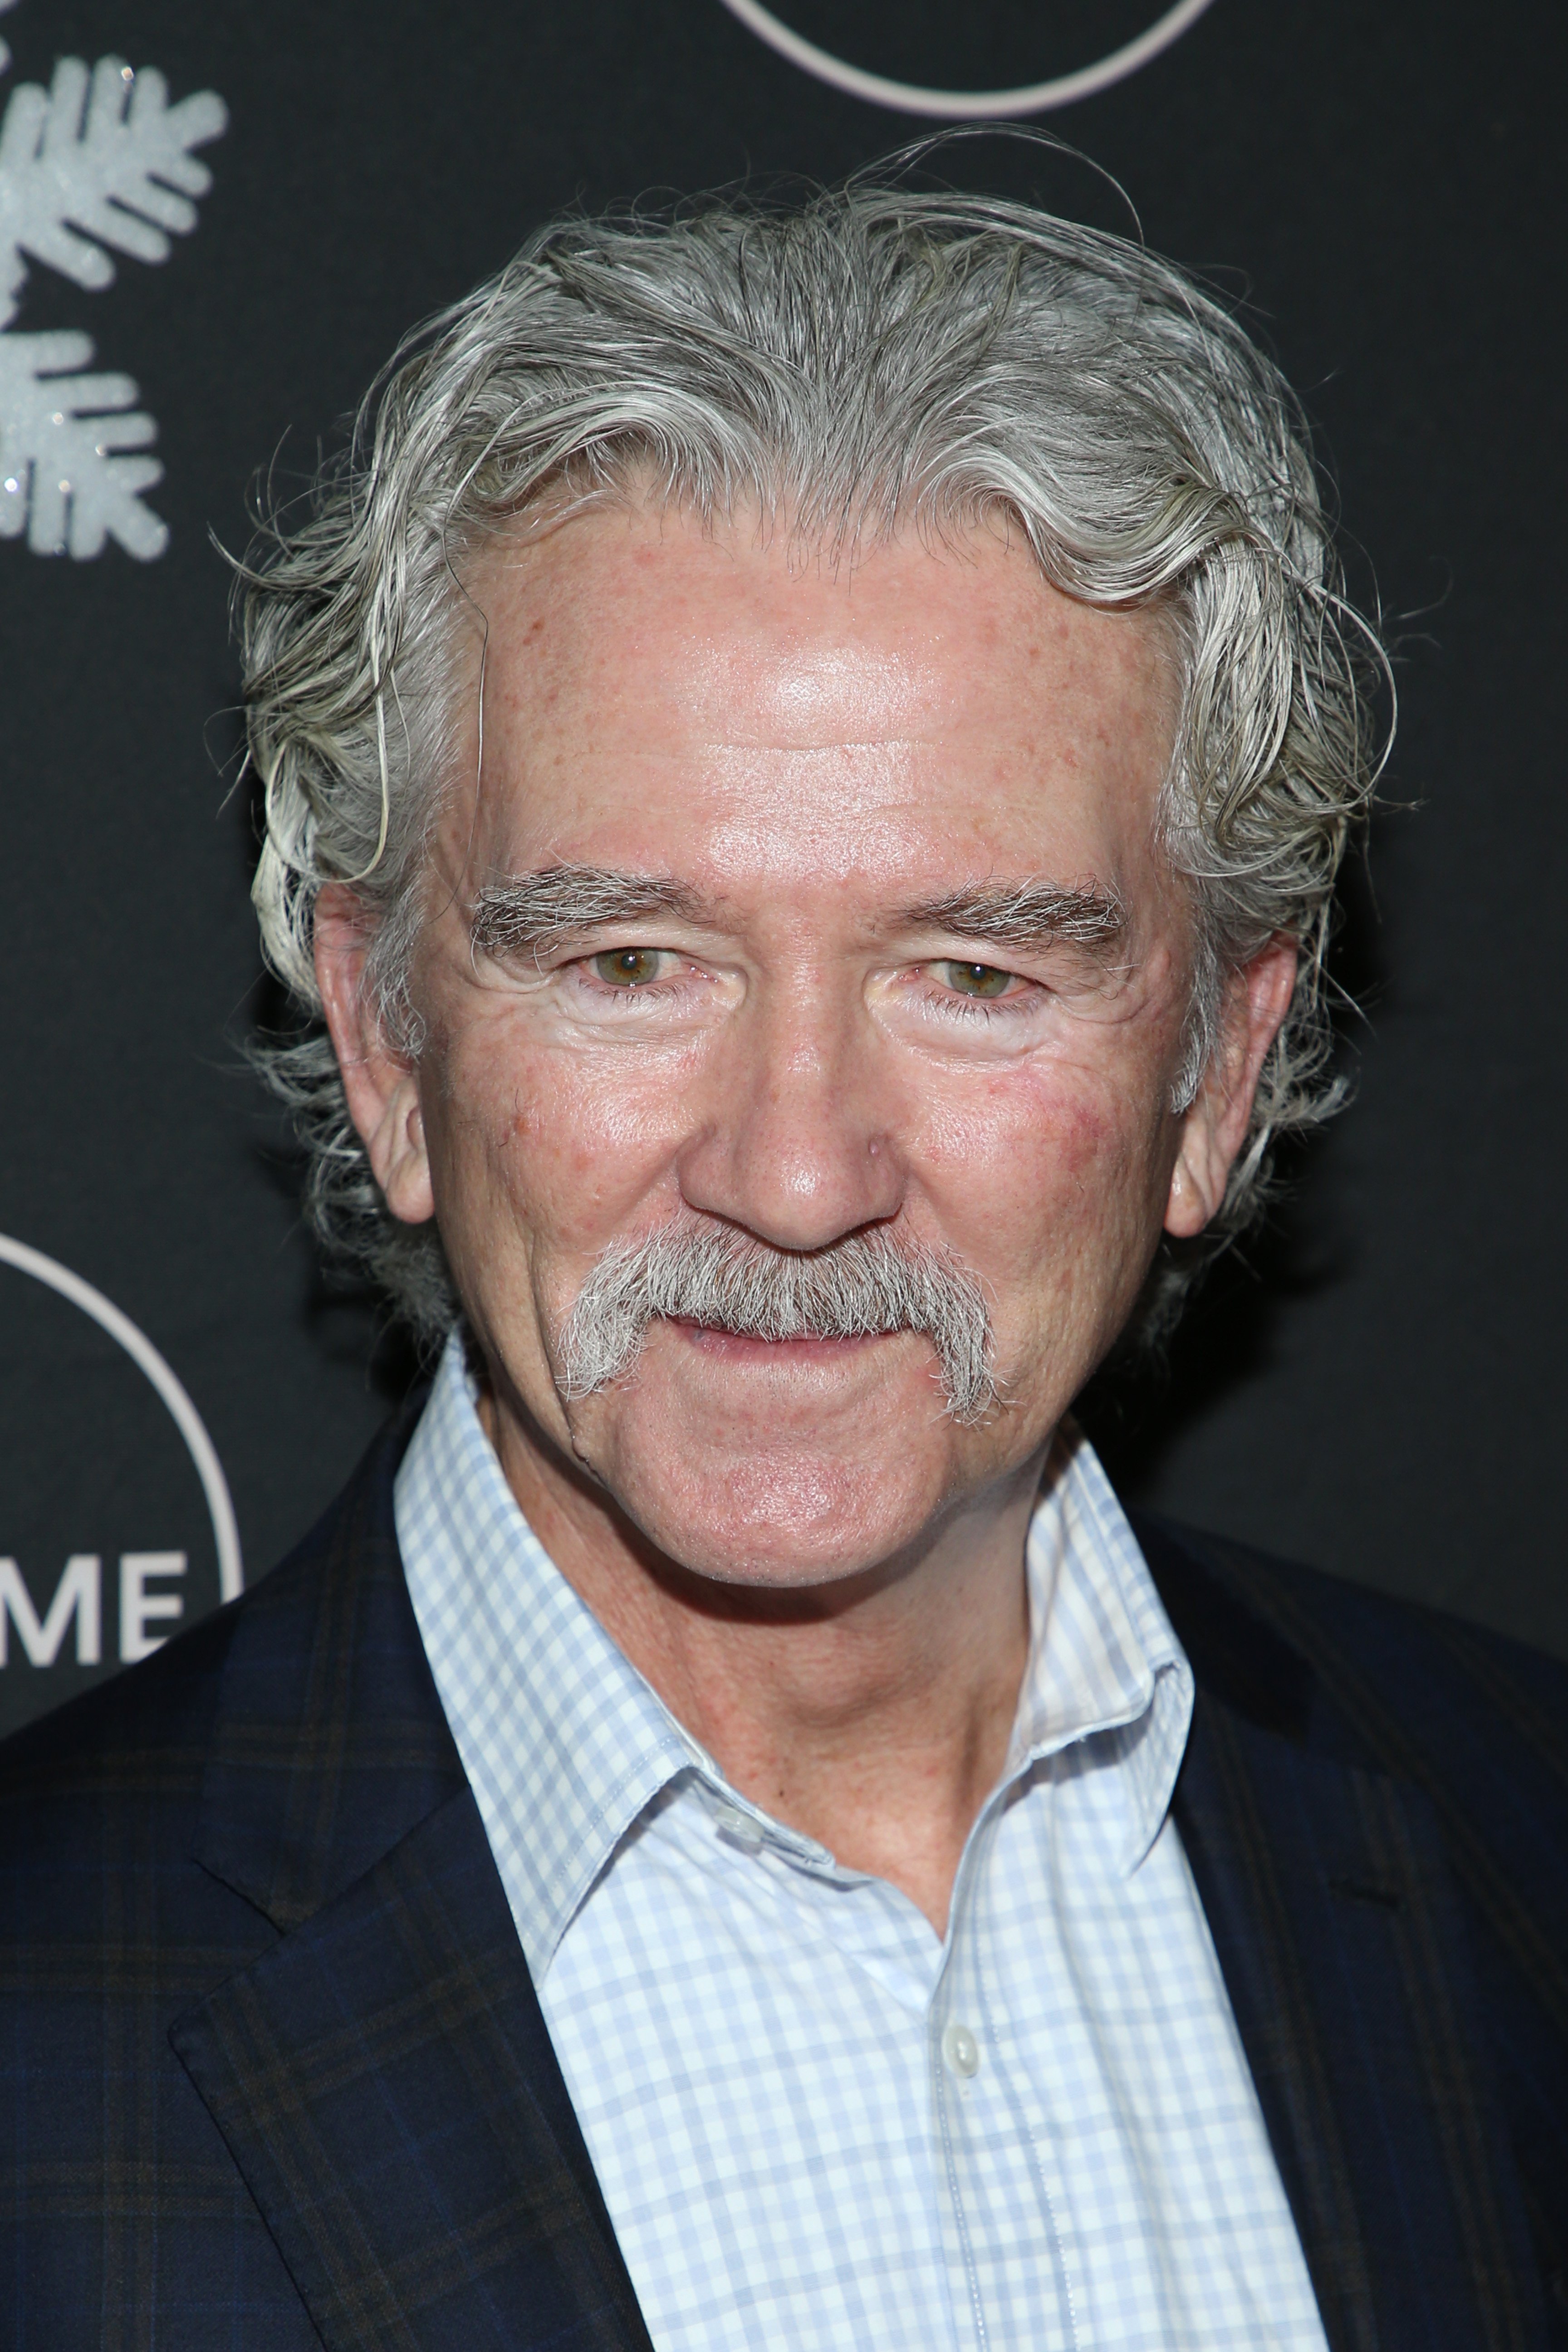 Patrick Duffy attends "It's A Wonderful Lifetime" Holiday Party at STK Los Angeles on October 22, 2019, in Los Angeles, California. | Source: Getty Images